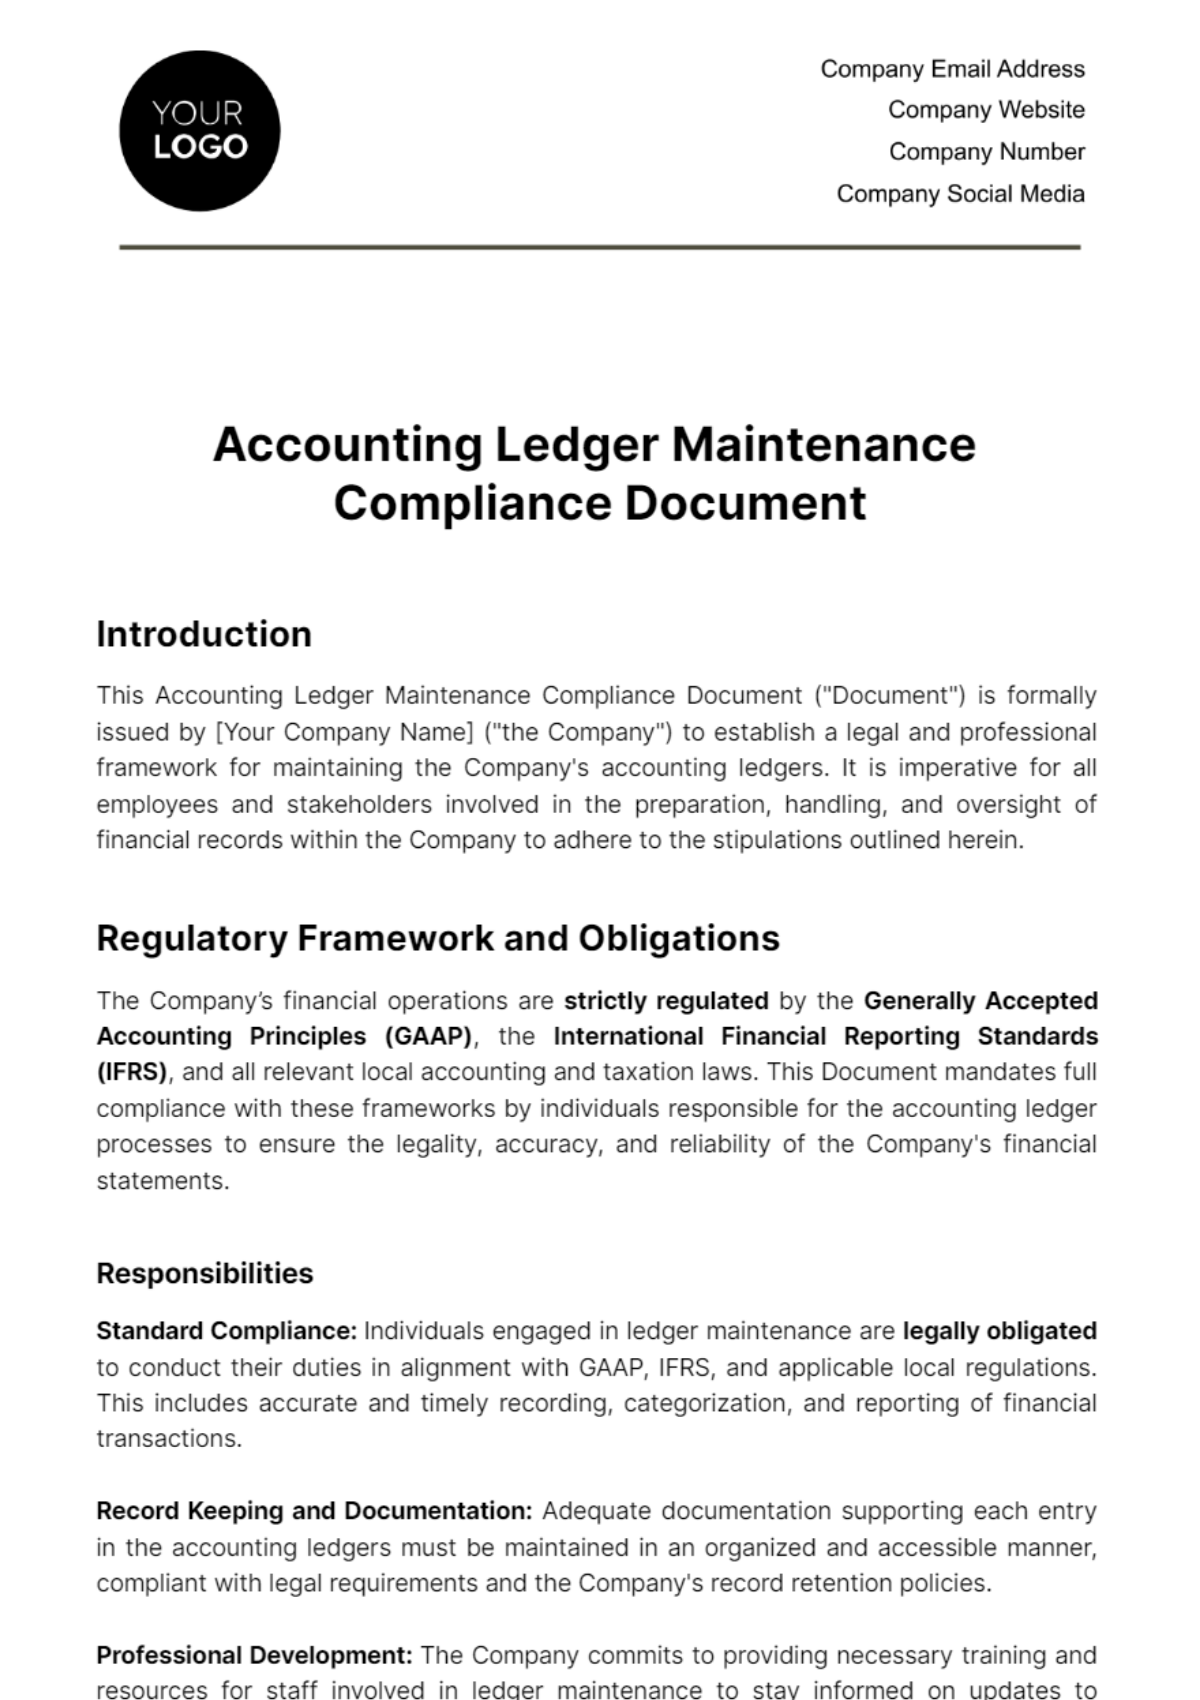 Free Accounting Ledger Maintenance Compliance Document Template